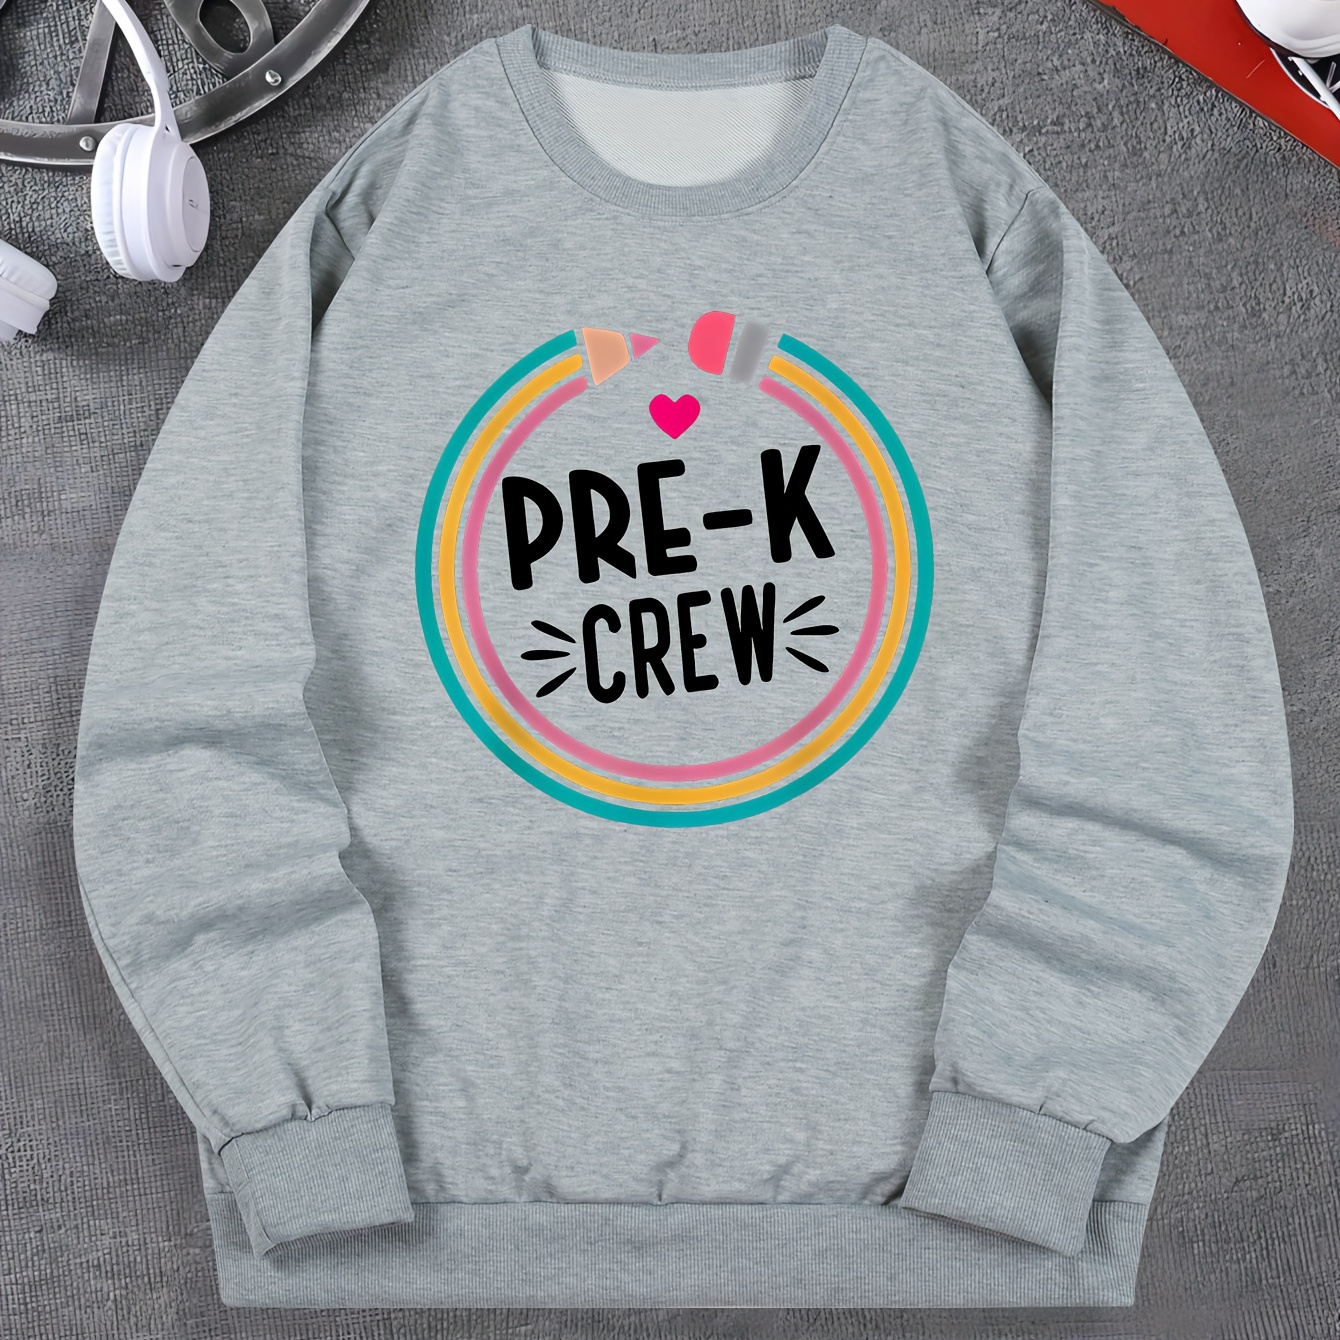 

Pre-k Crew And Cat Whiskers Print, Men's Crew Neck Sweatshirt, Streetwear Pullover With Long Sleeves, Slightly Flex Top Clothing For Men For All Seasons